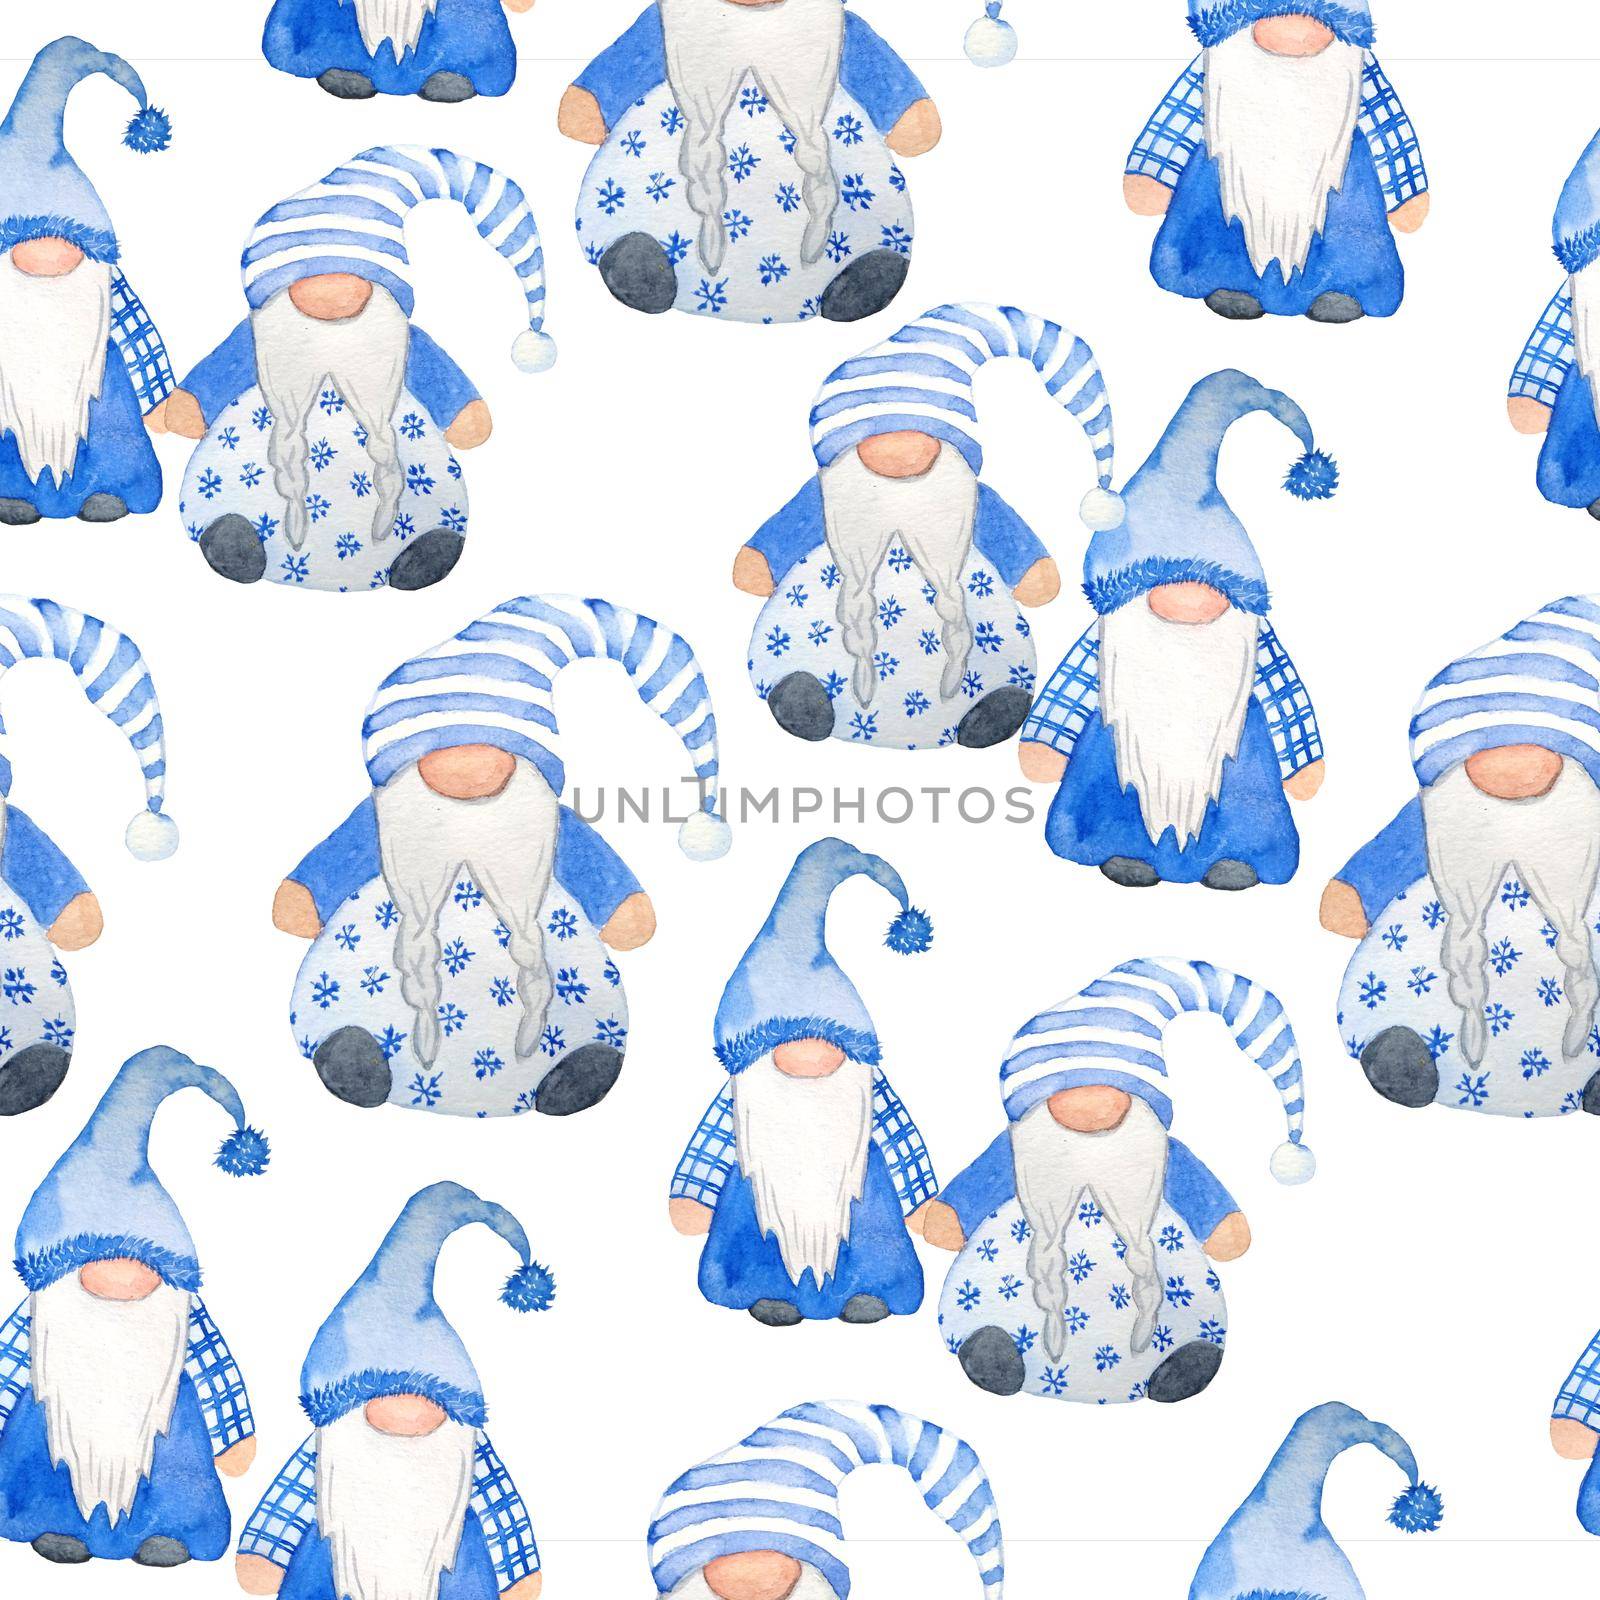 Watercolor hand drawn seamless pattern nordic scandinavian gnomes for christmas decor tree. New year illustration in blue grey cartoon style. Funny winter character north swedish elf in hat beard. Greeting card